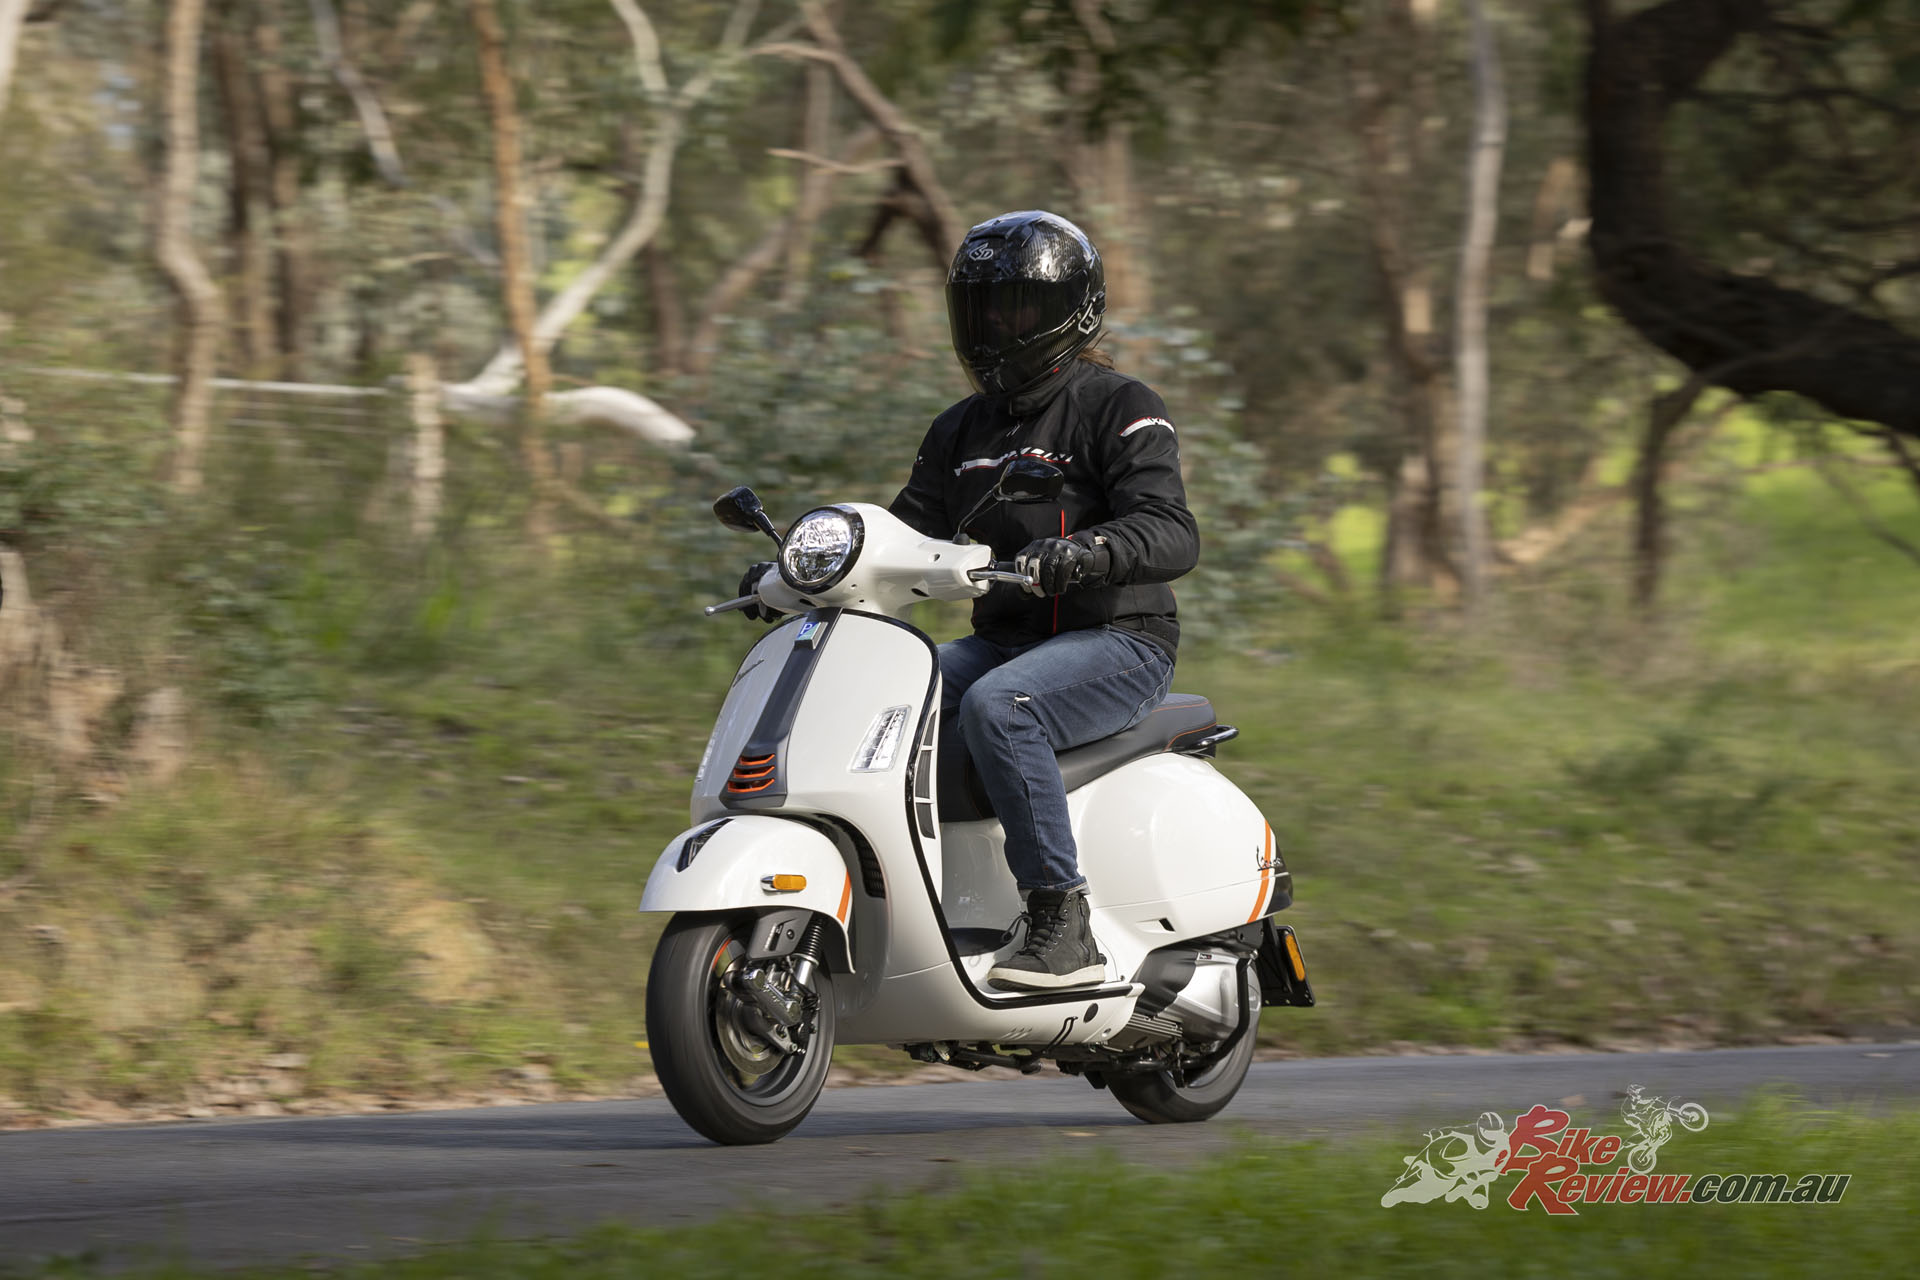 "Out on the road and the GTS feels nothing like the 155kg it weighs on paper. Those skinny, tiny tyres mean the Vespa darts where you want it to go and turns on a dime."